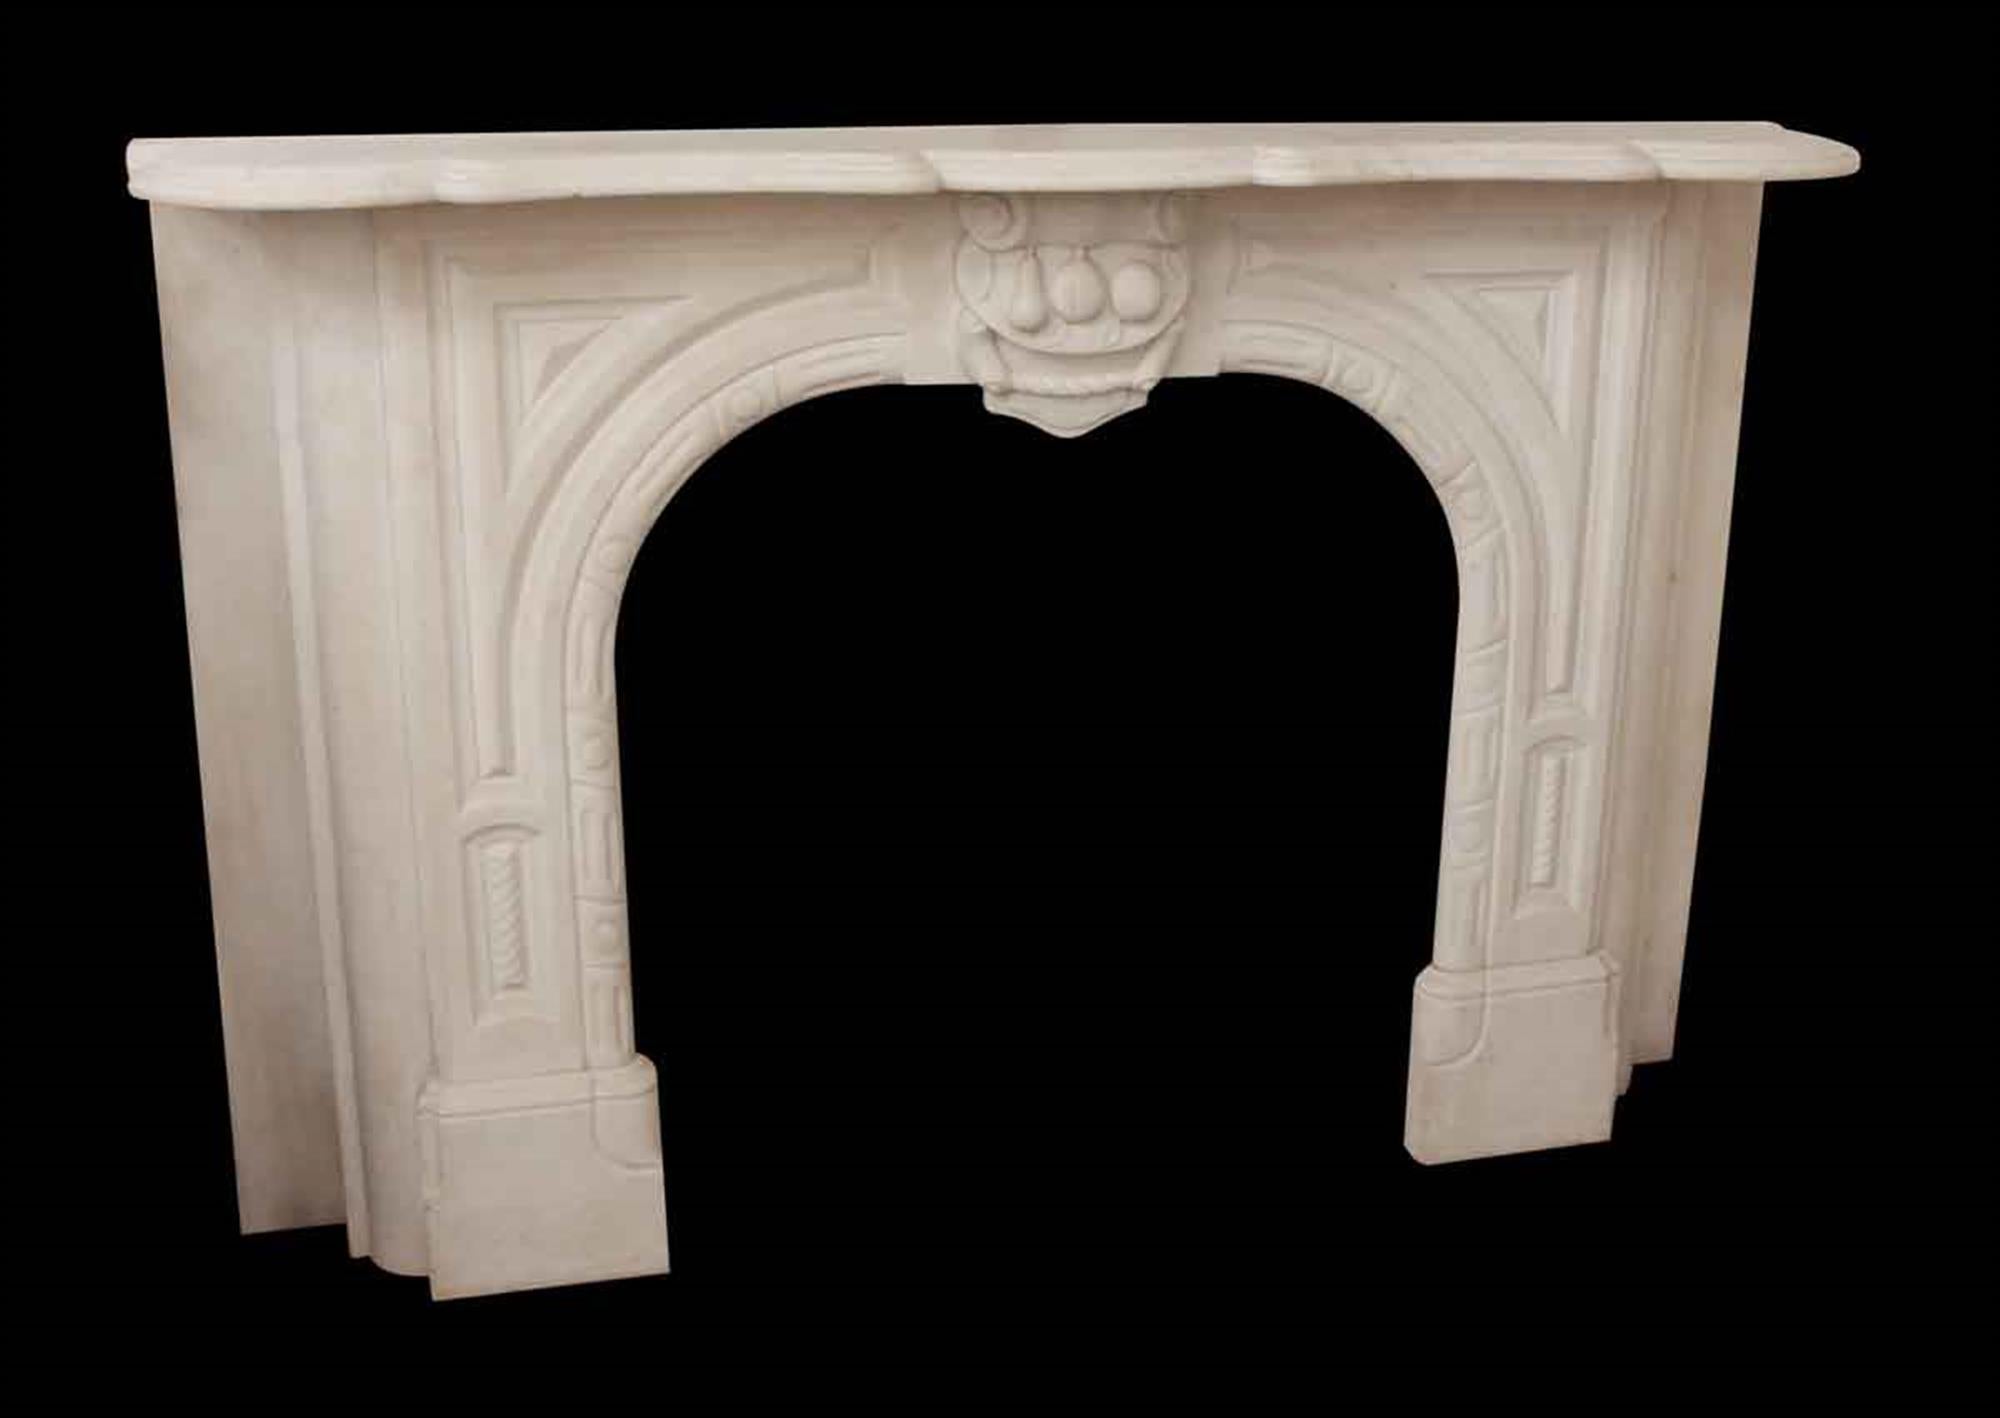 1890s white hand carved marble mantel with decorative carvings throughout. Fruit details in the center of the keystone. Rescued from a Manhattan apartment this can be seen at our 2420 Broadway location on the upper west side in Manhattan.